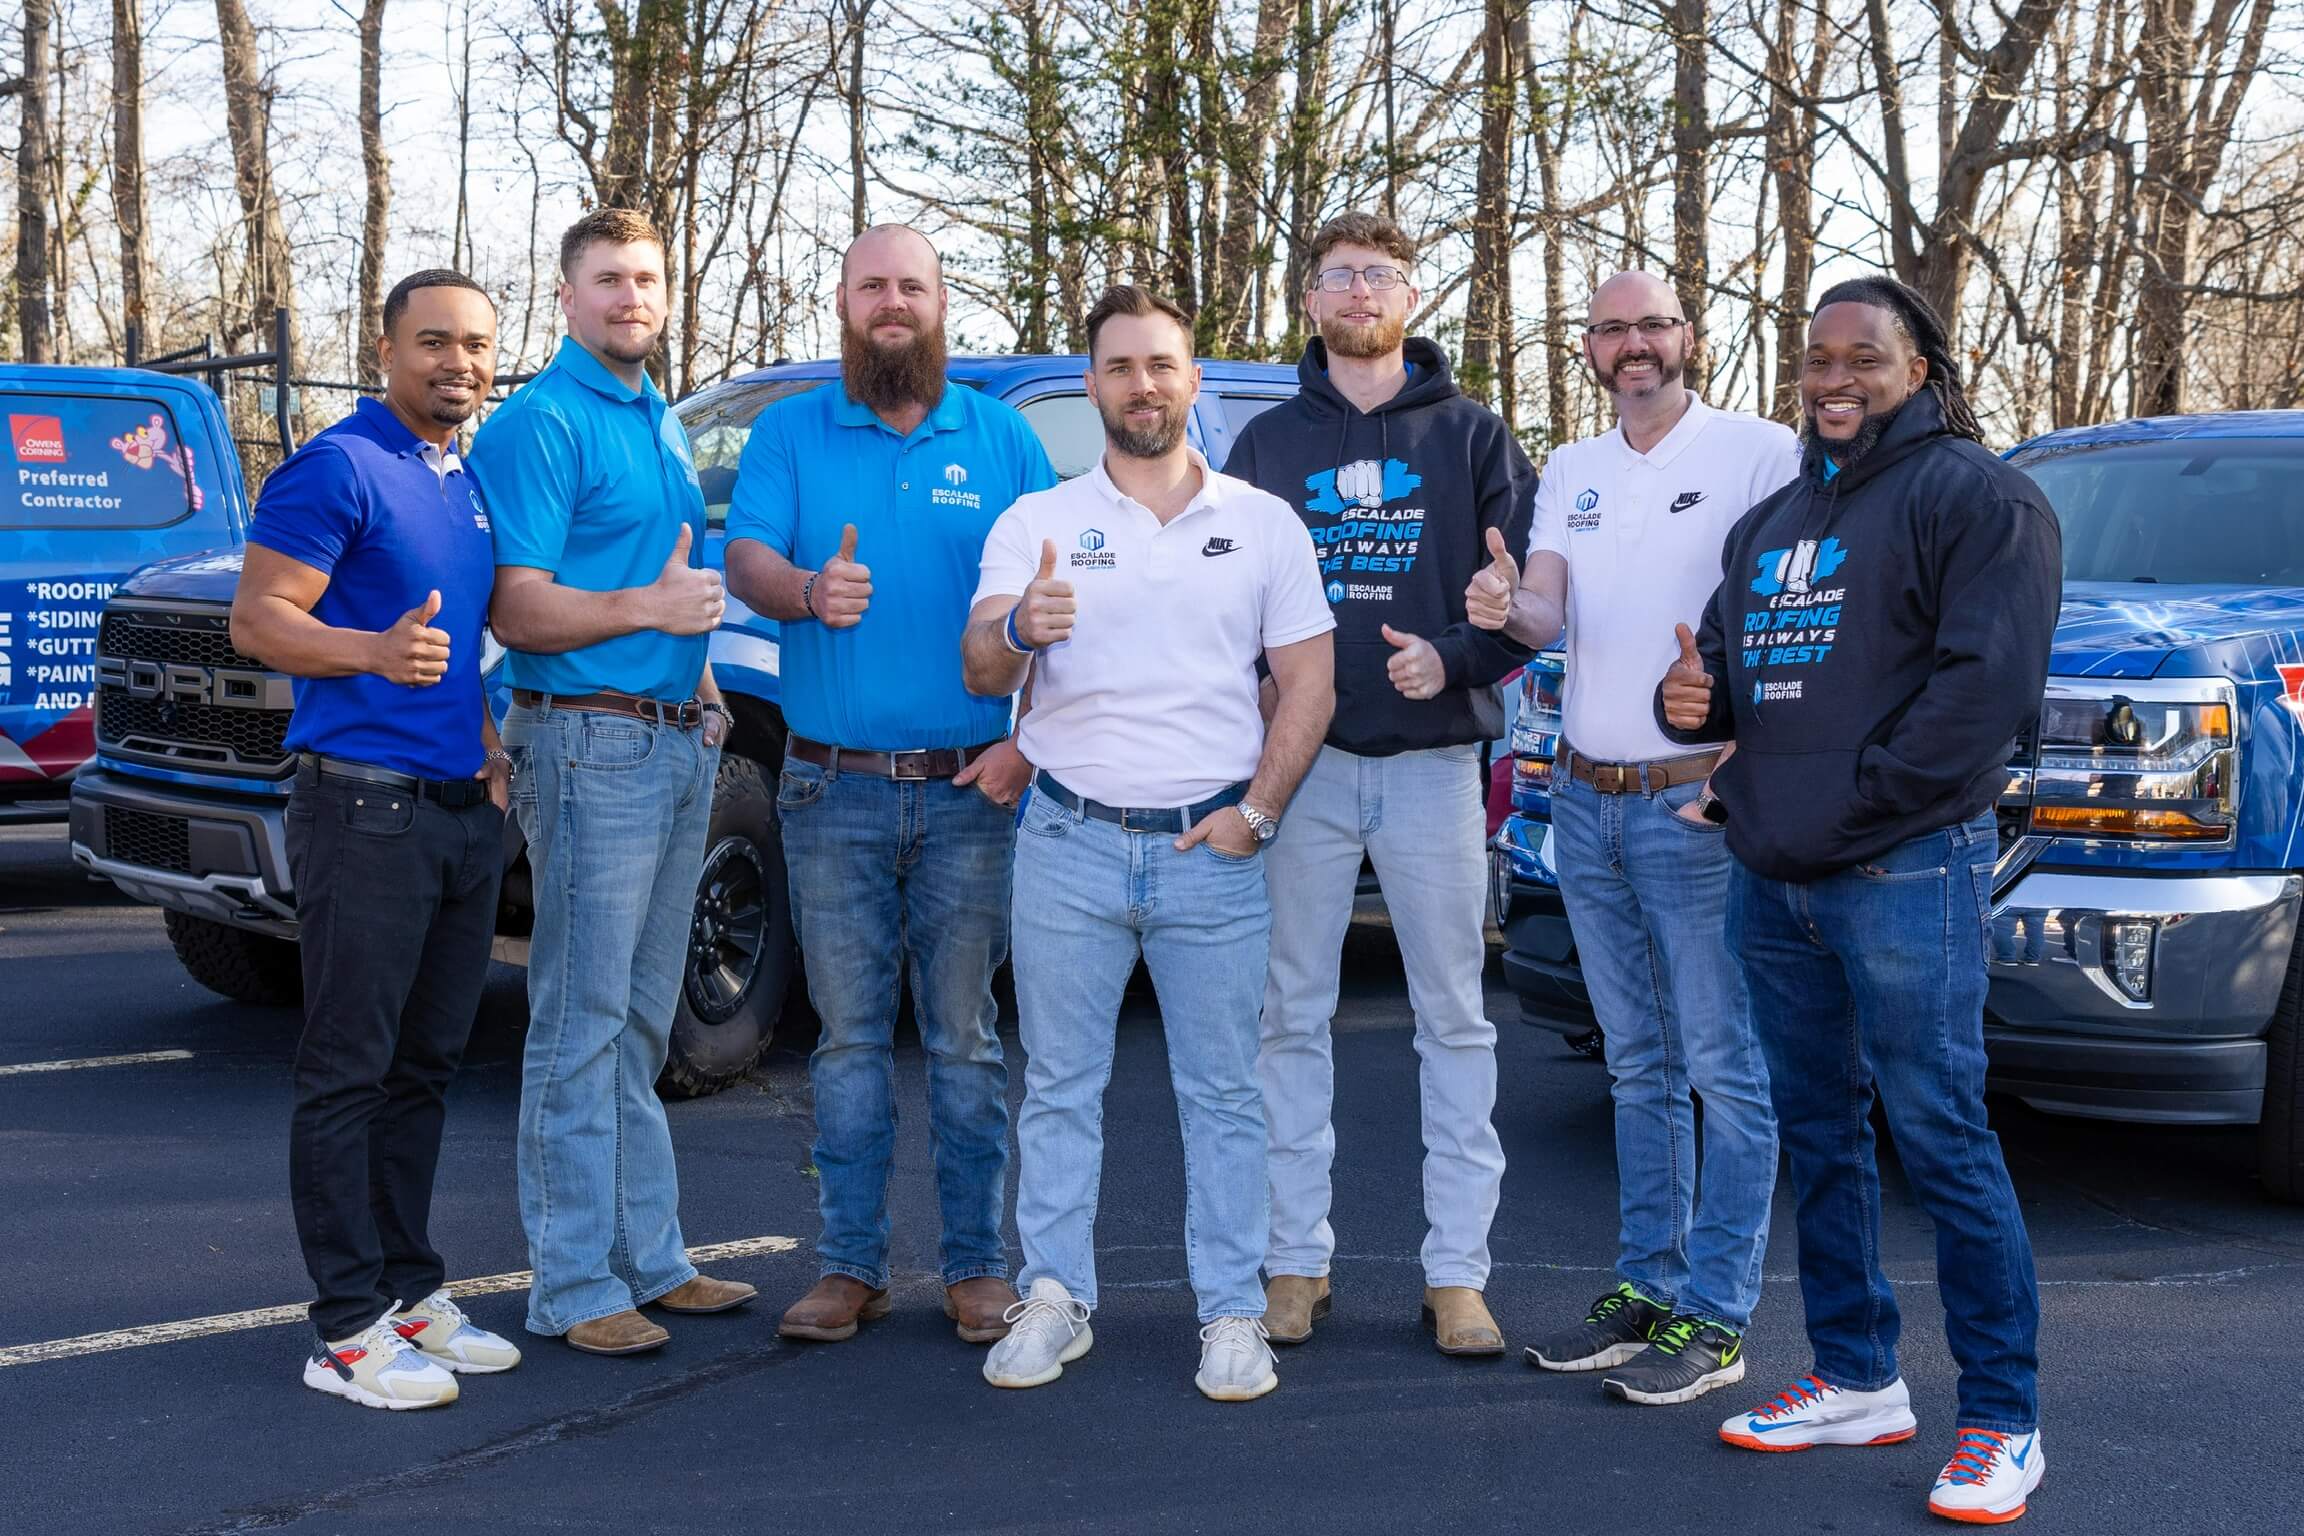 escalade roofing team photo clemmons nc